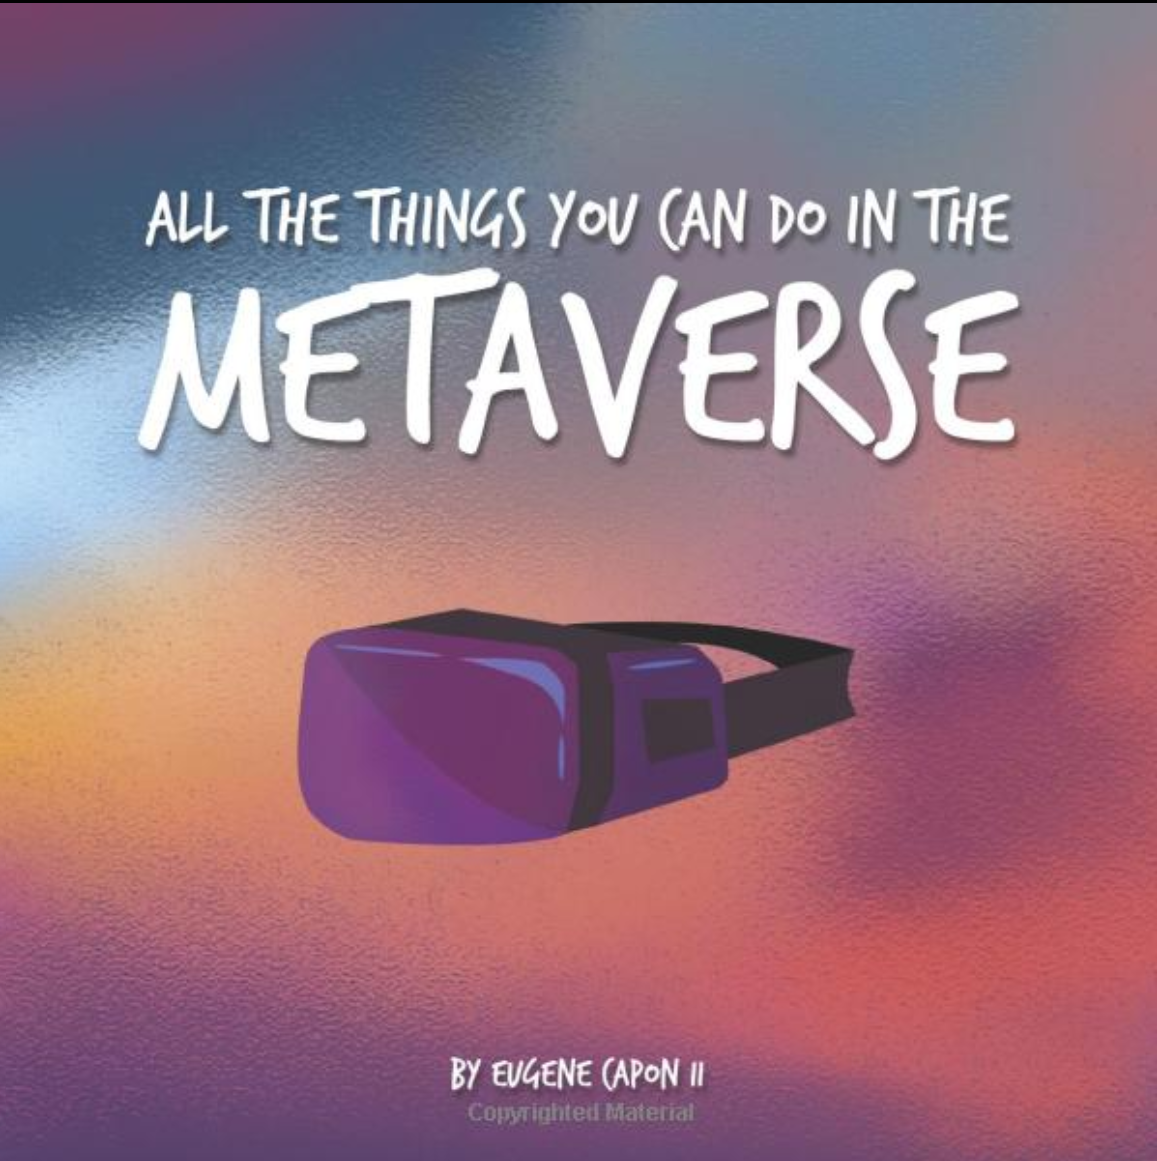 Children's book, All the things you can do in the Metaverse